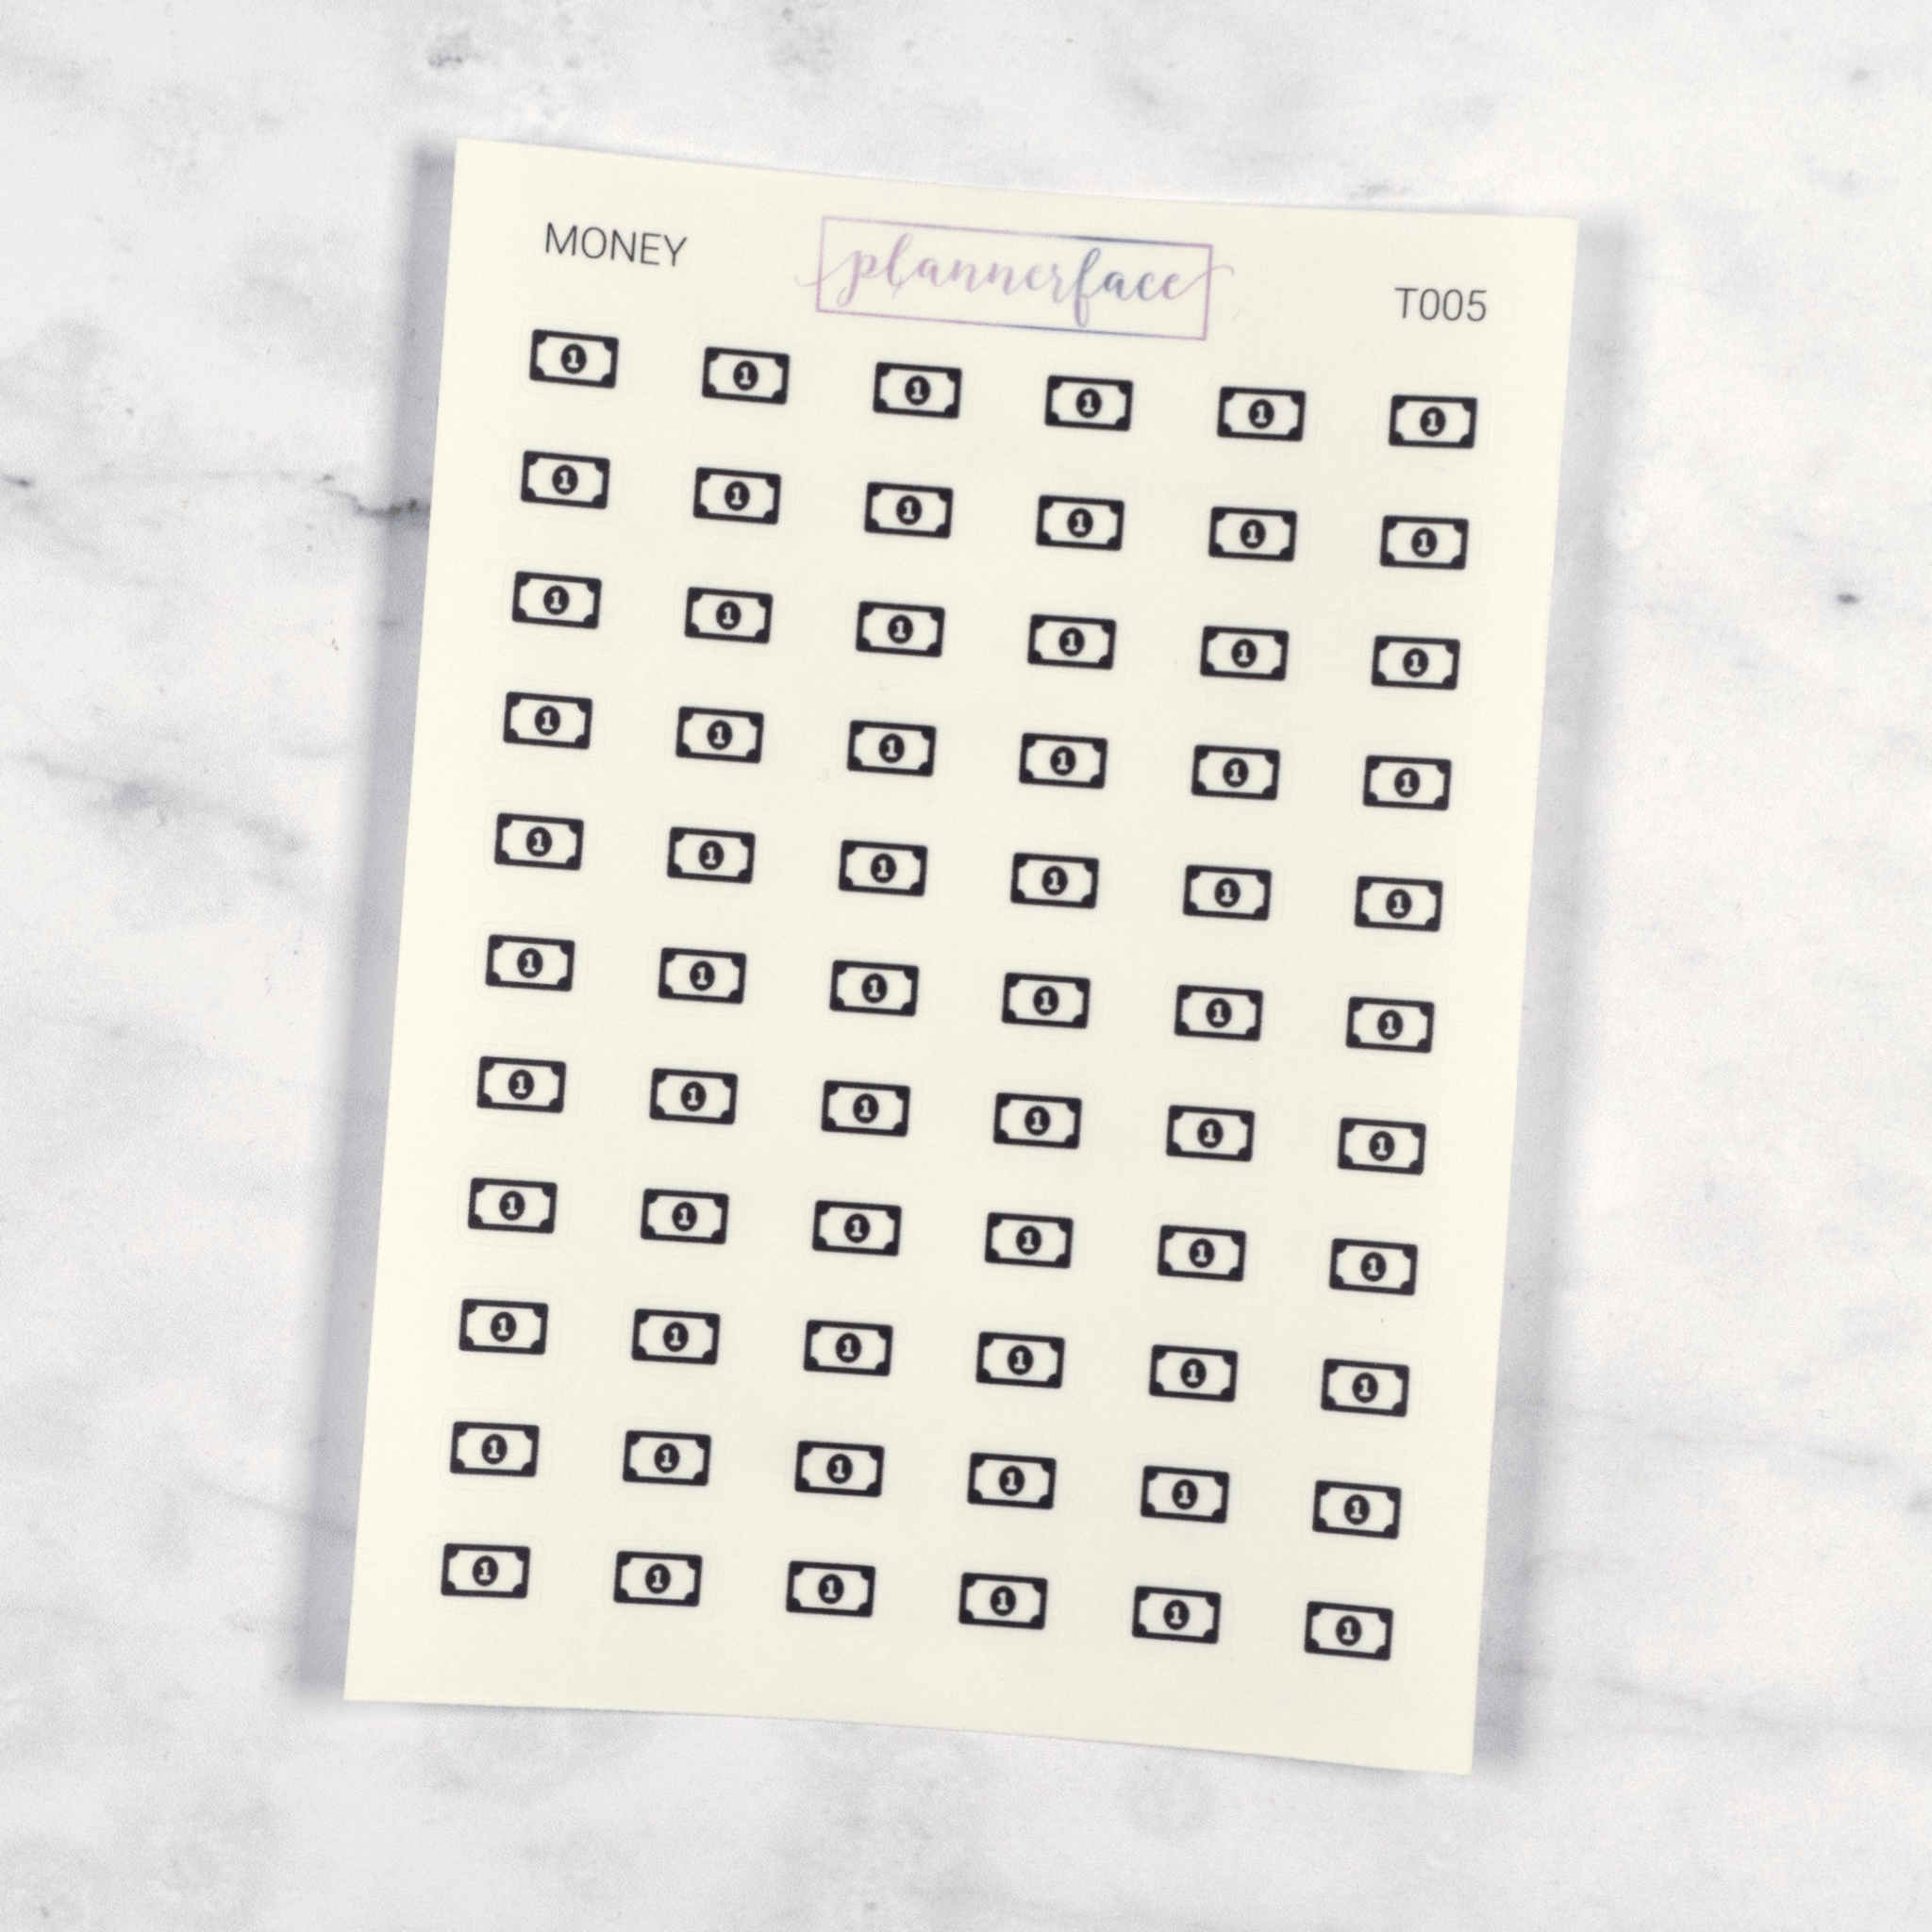 Money Transparent Icon Stickers by Plannerface